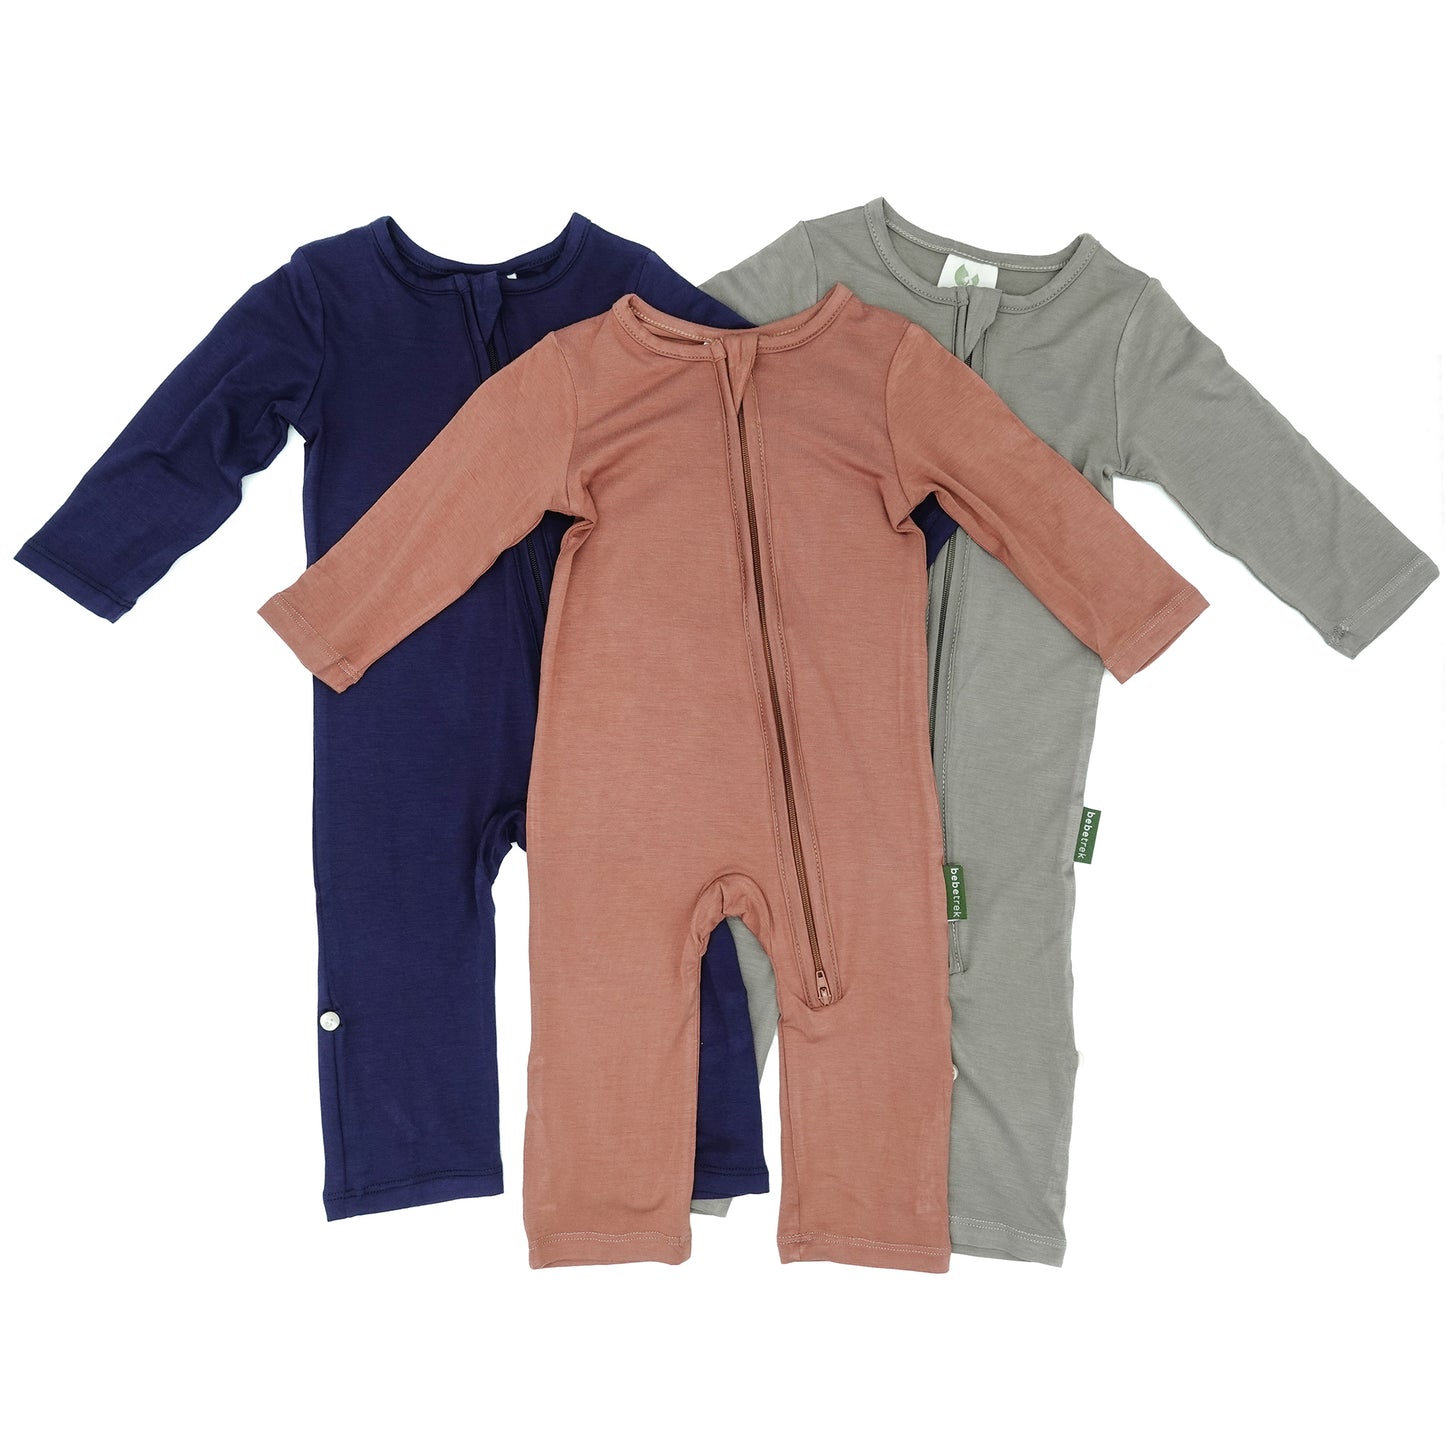 UPF 50+ baby romper for sun protection